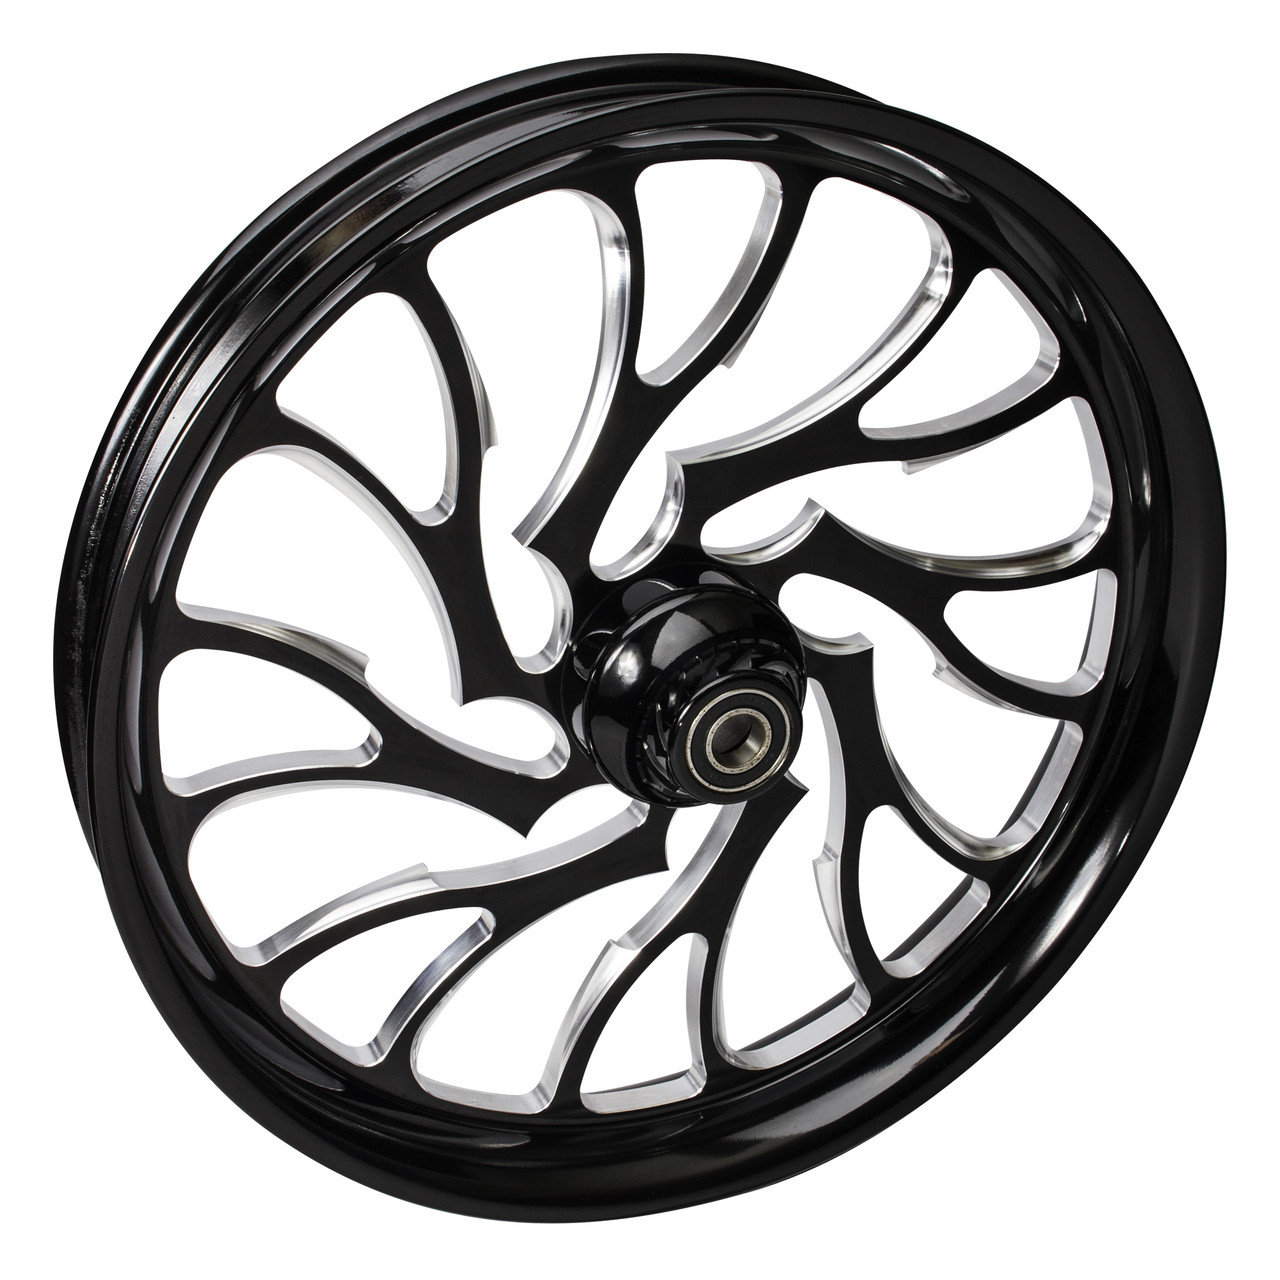 FTD Customs Black Contrast Harley Davidson 21 inch Fat Front Motorcycle Wheels